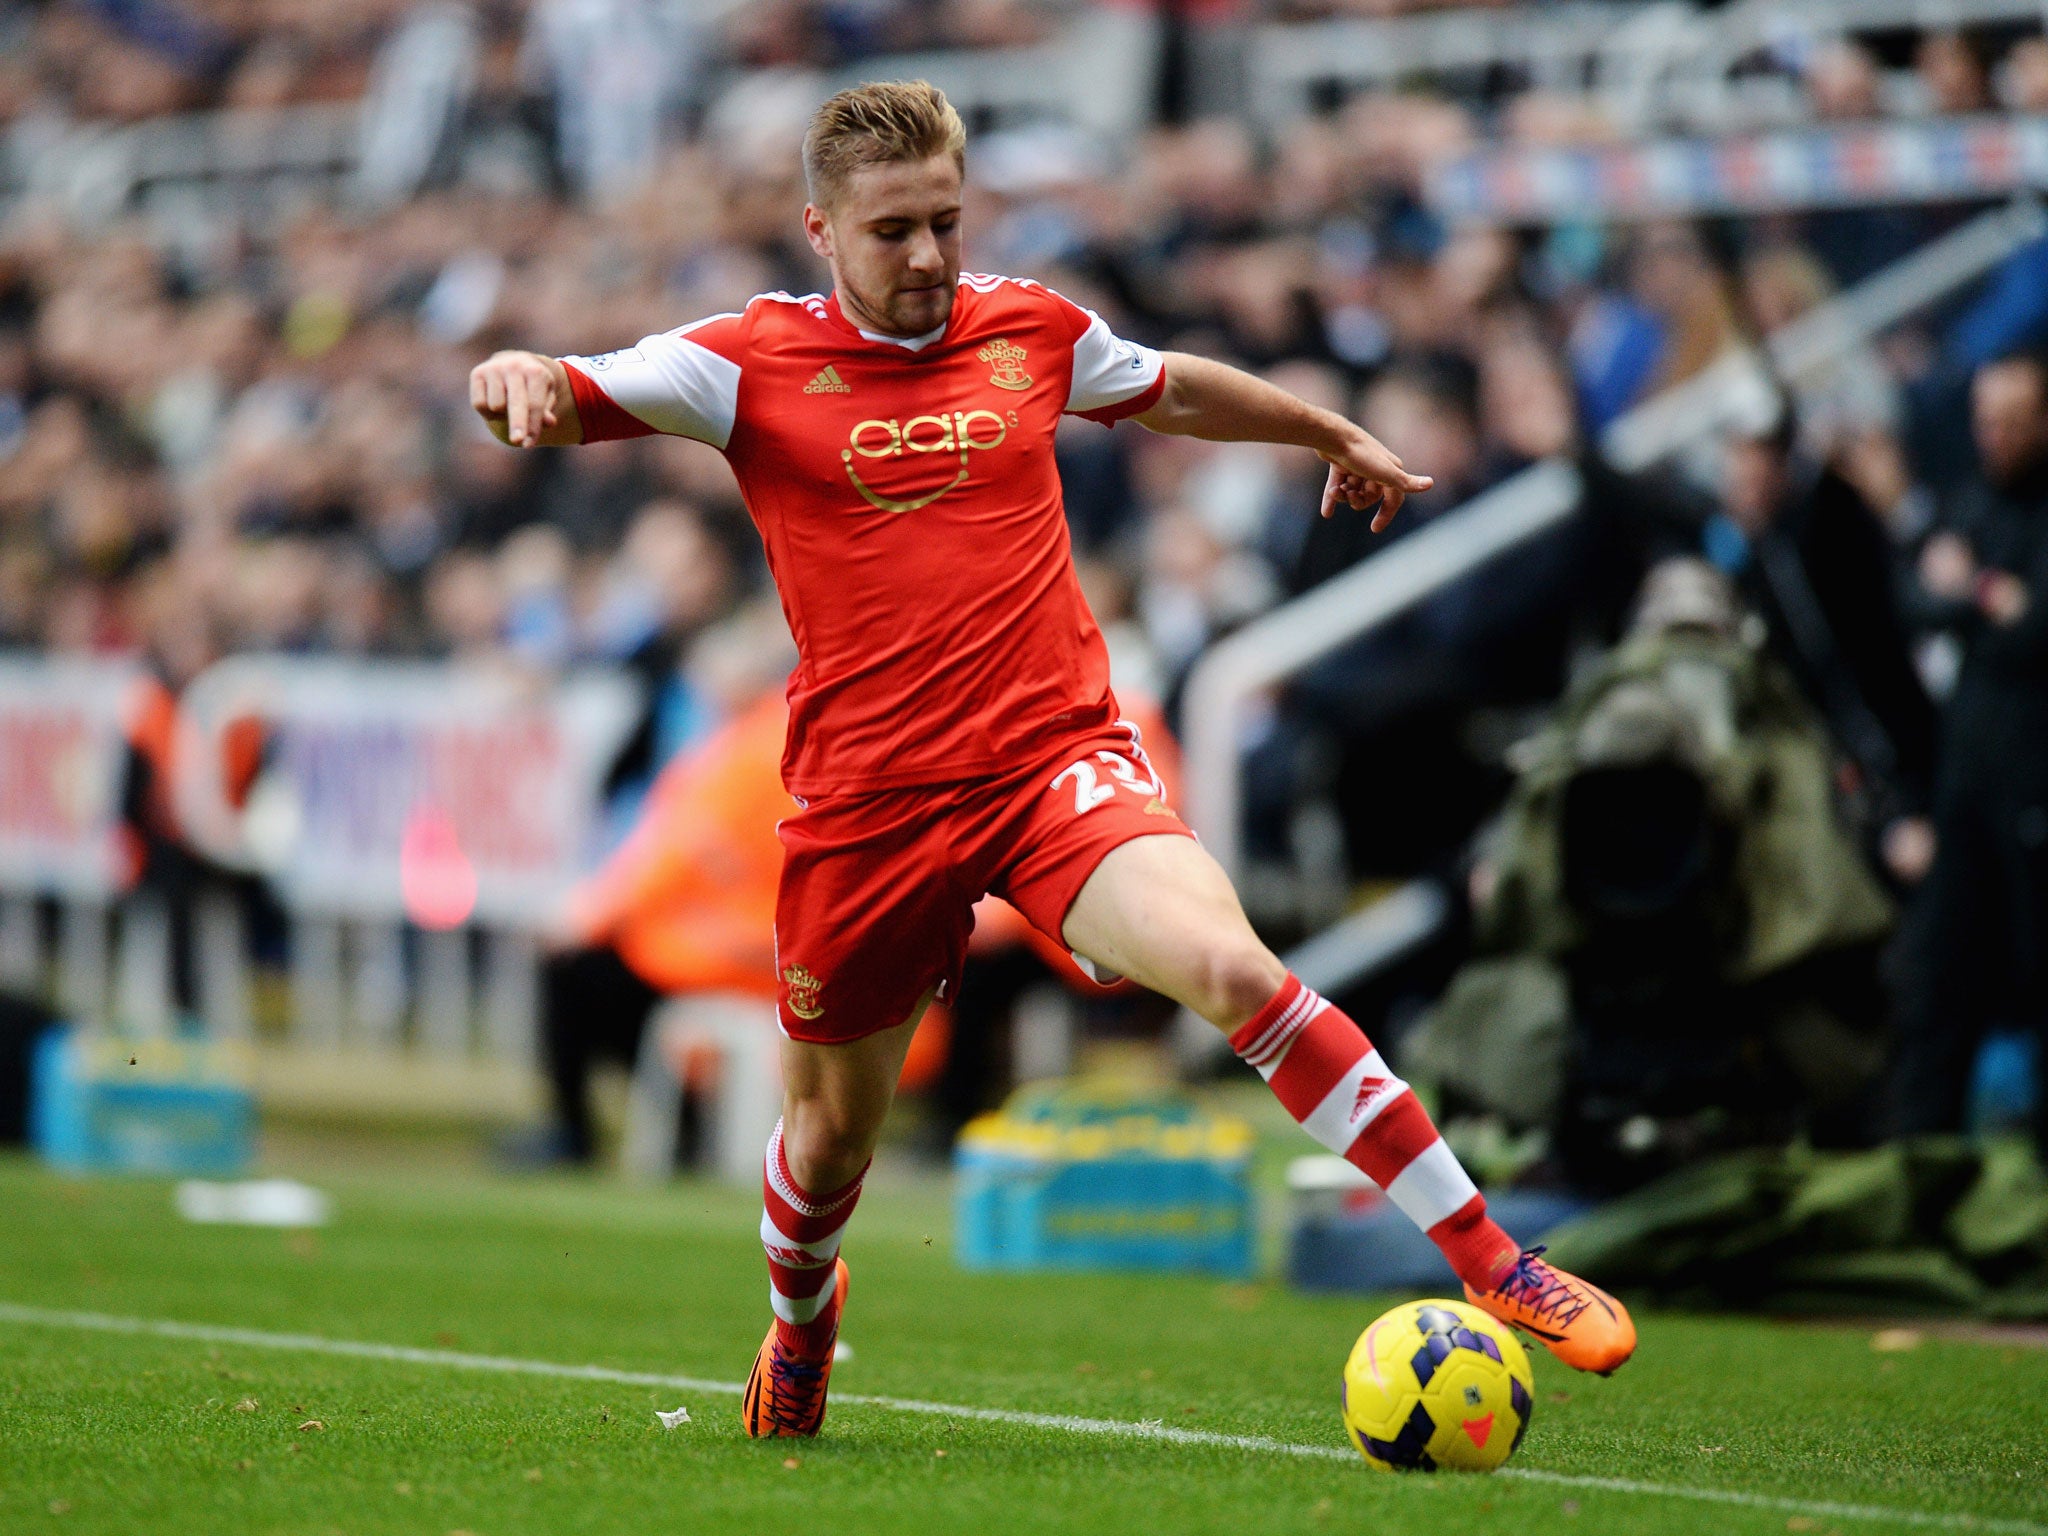 Luke Shaw, England's most talented young left-back, has to be retained